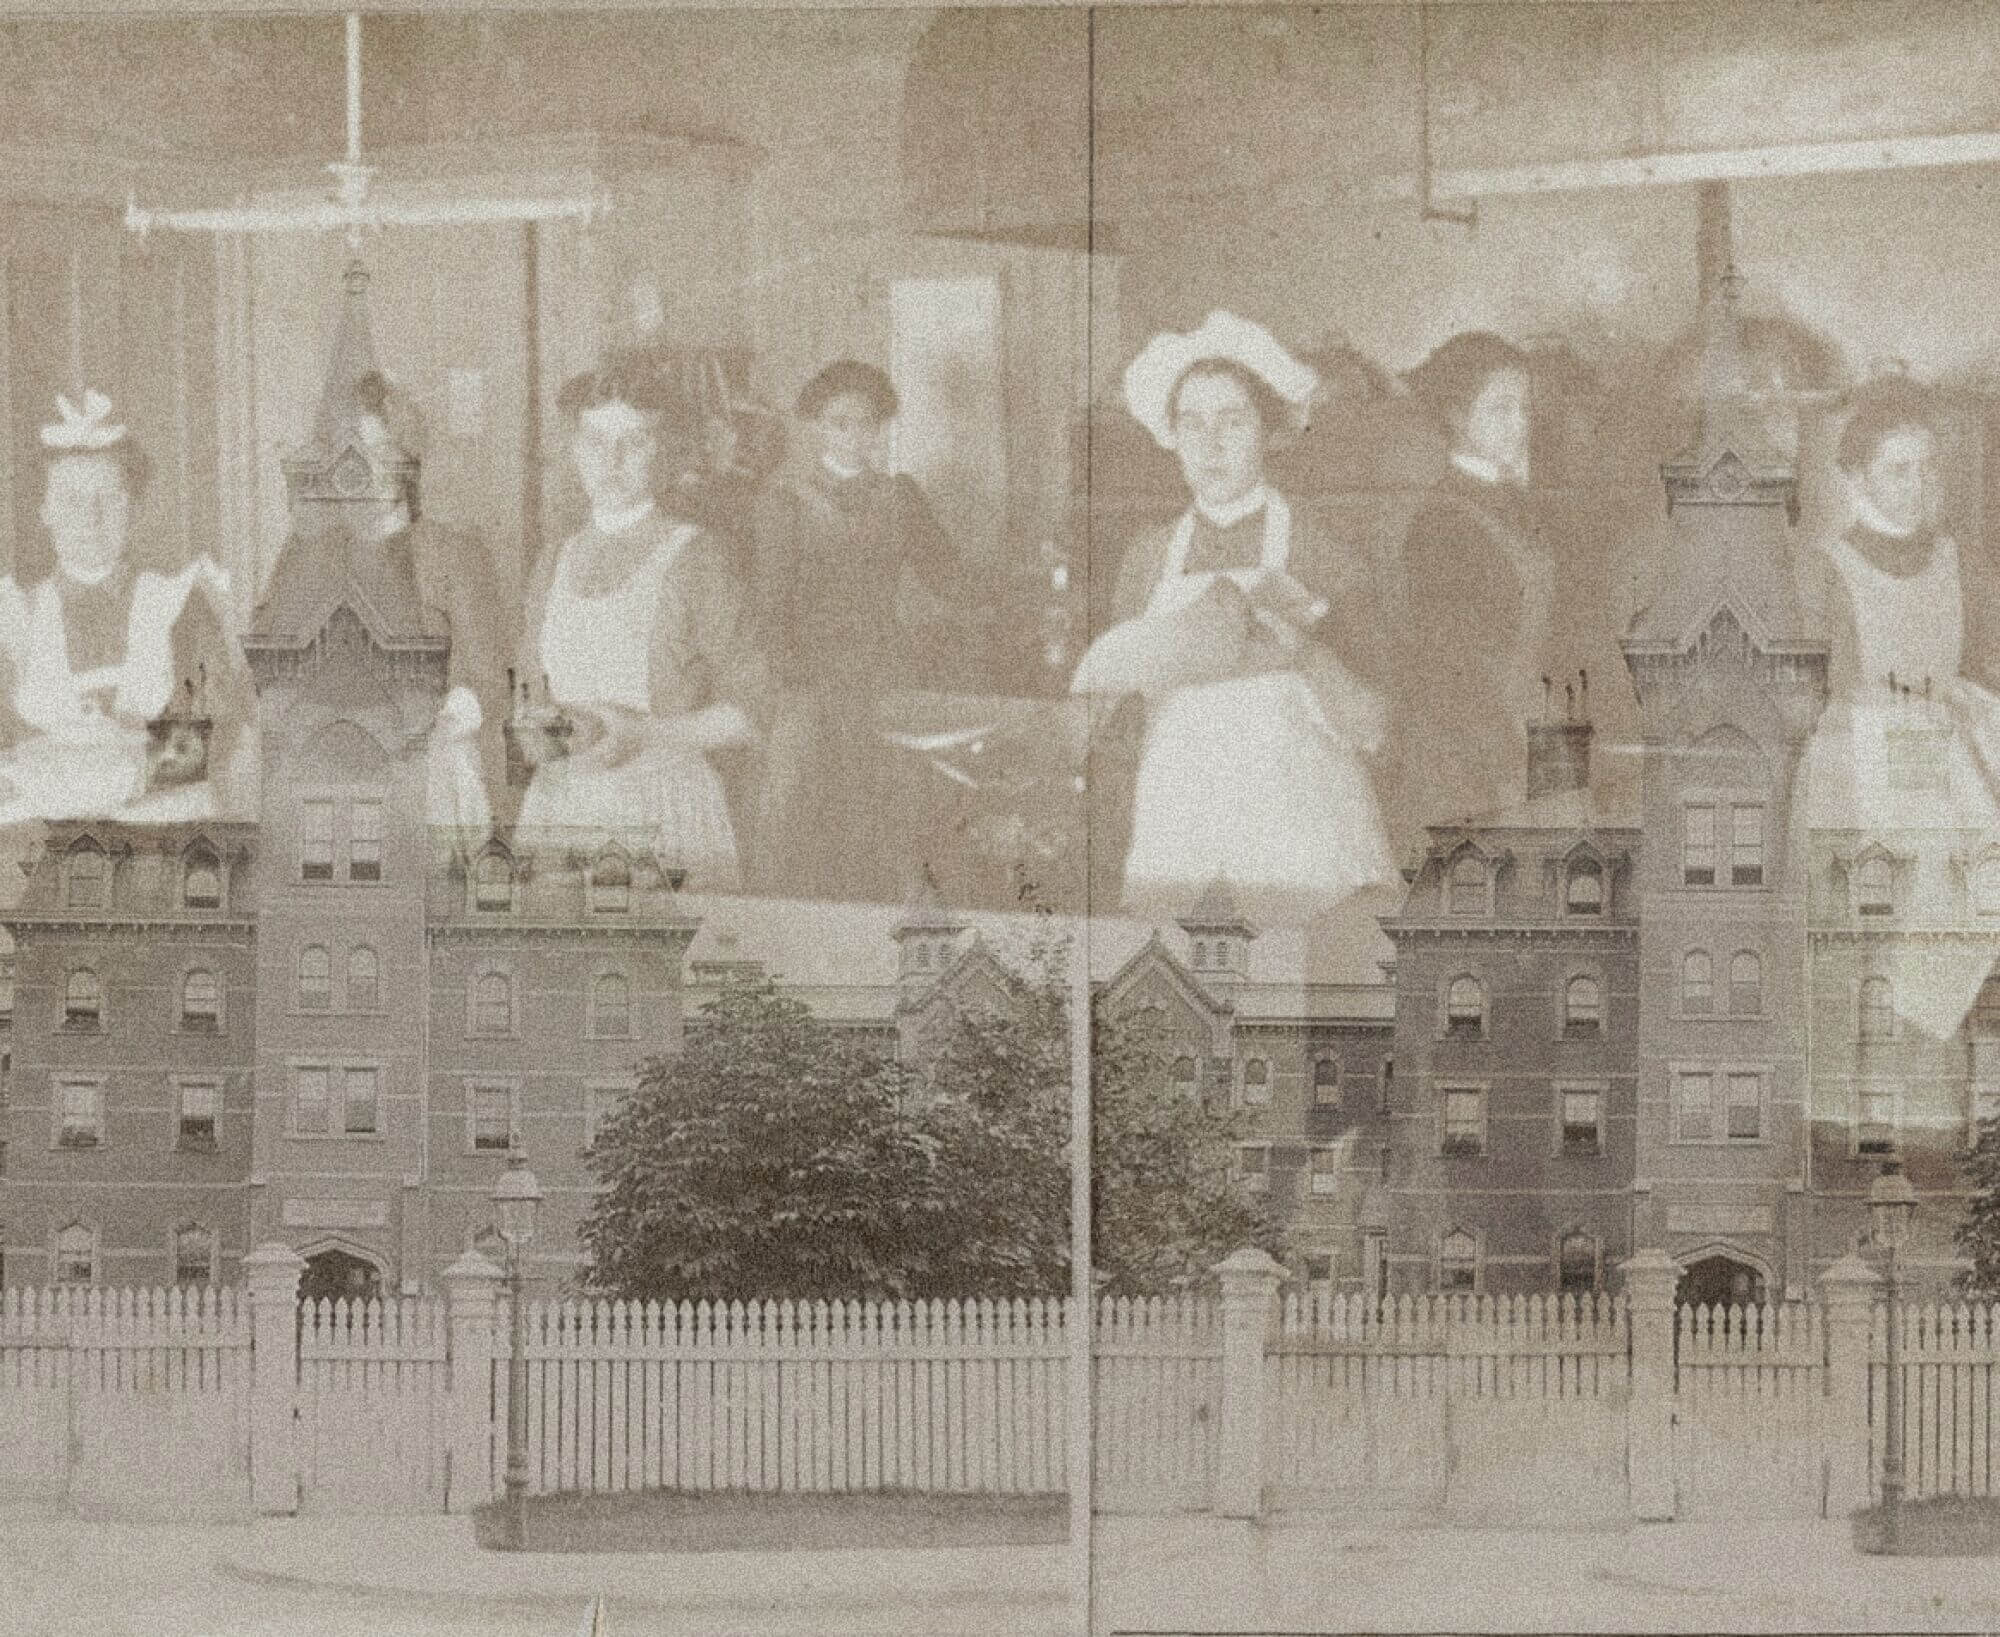 A sepia image of brick buildings. There is a fence around the buildings. Superimposed in front and above the buildings is an image of women in domestic outfits looking towards the camera. On the sides of the image it says "Publishers Webster & Albee Rochester, N.Y. Views of Toronto, Ont."